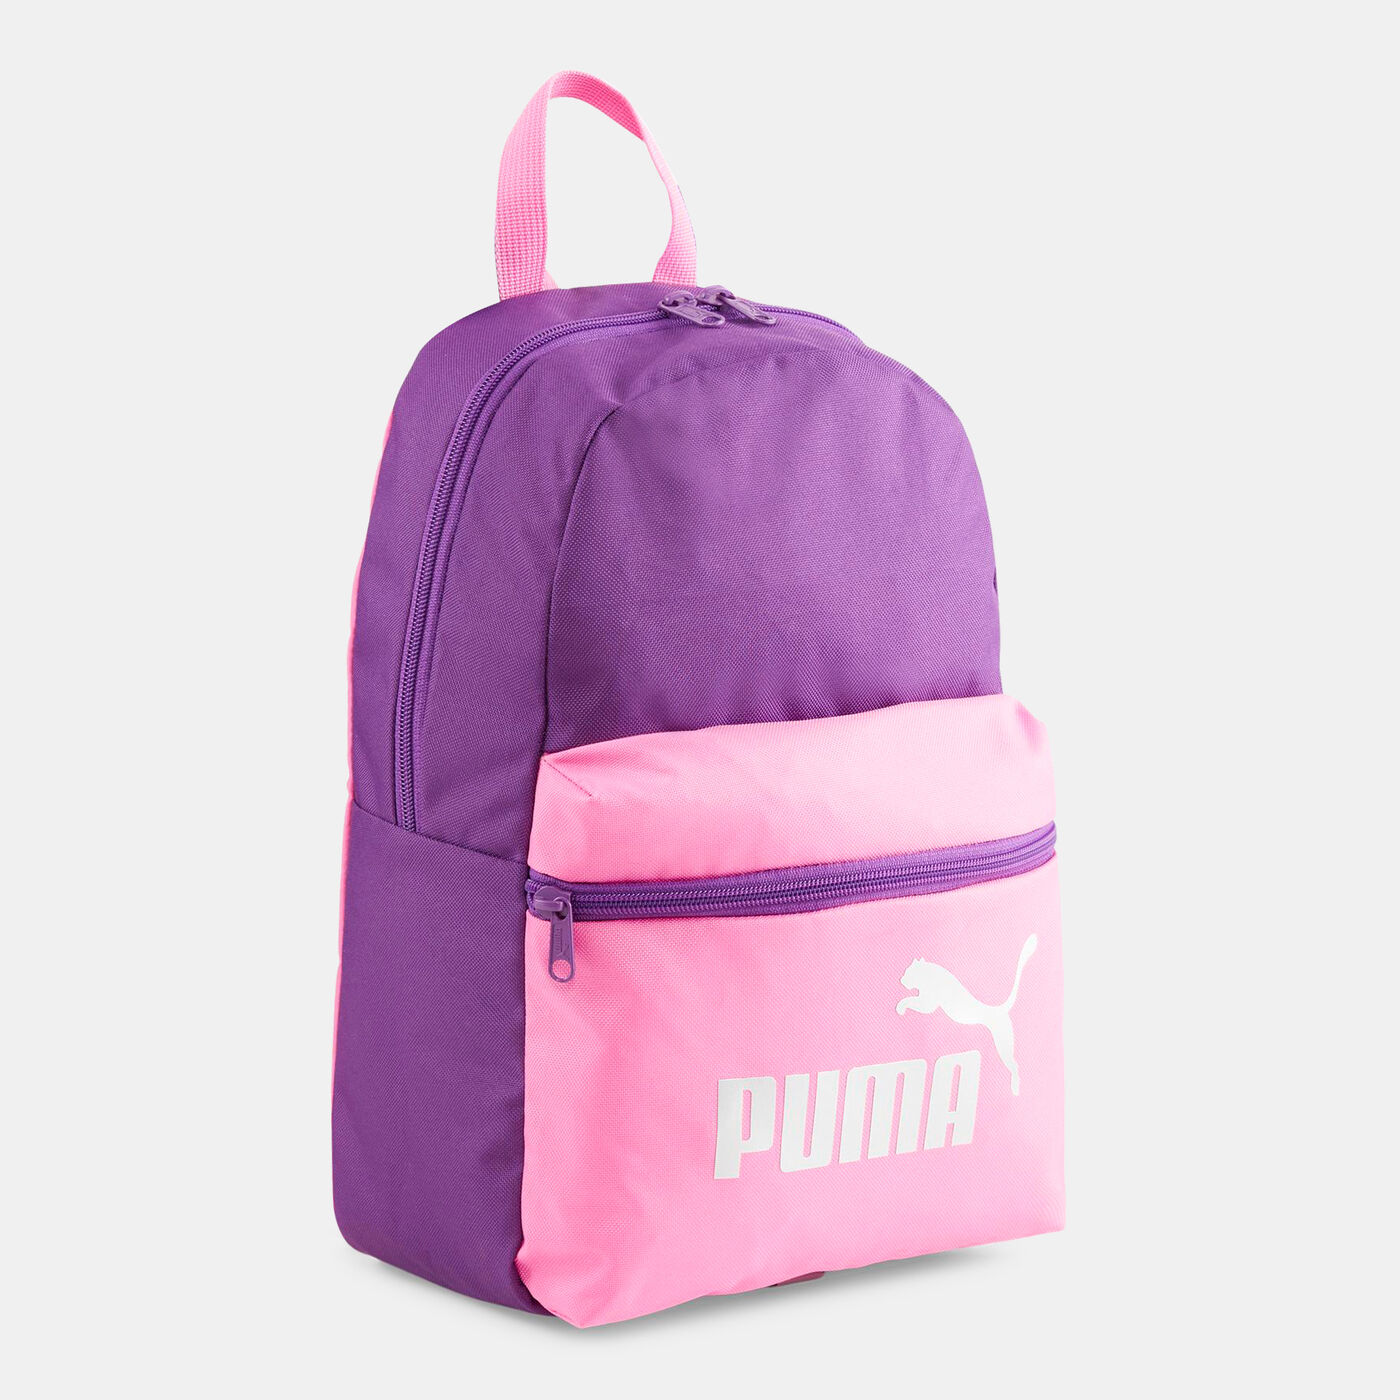 Kids' Phase Backpack (Small)